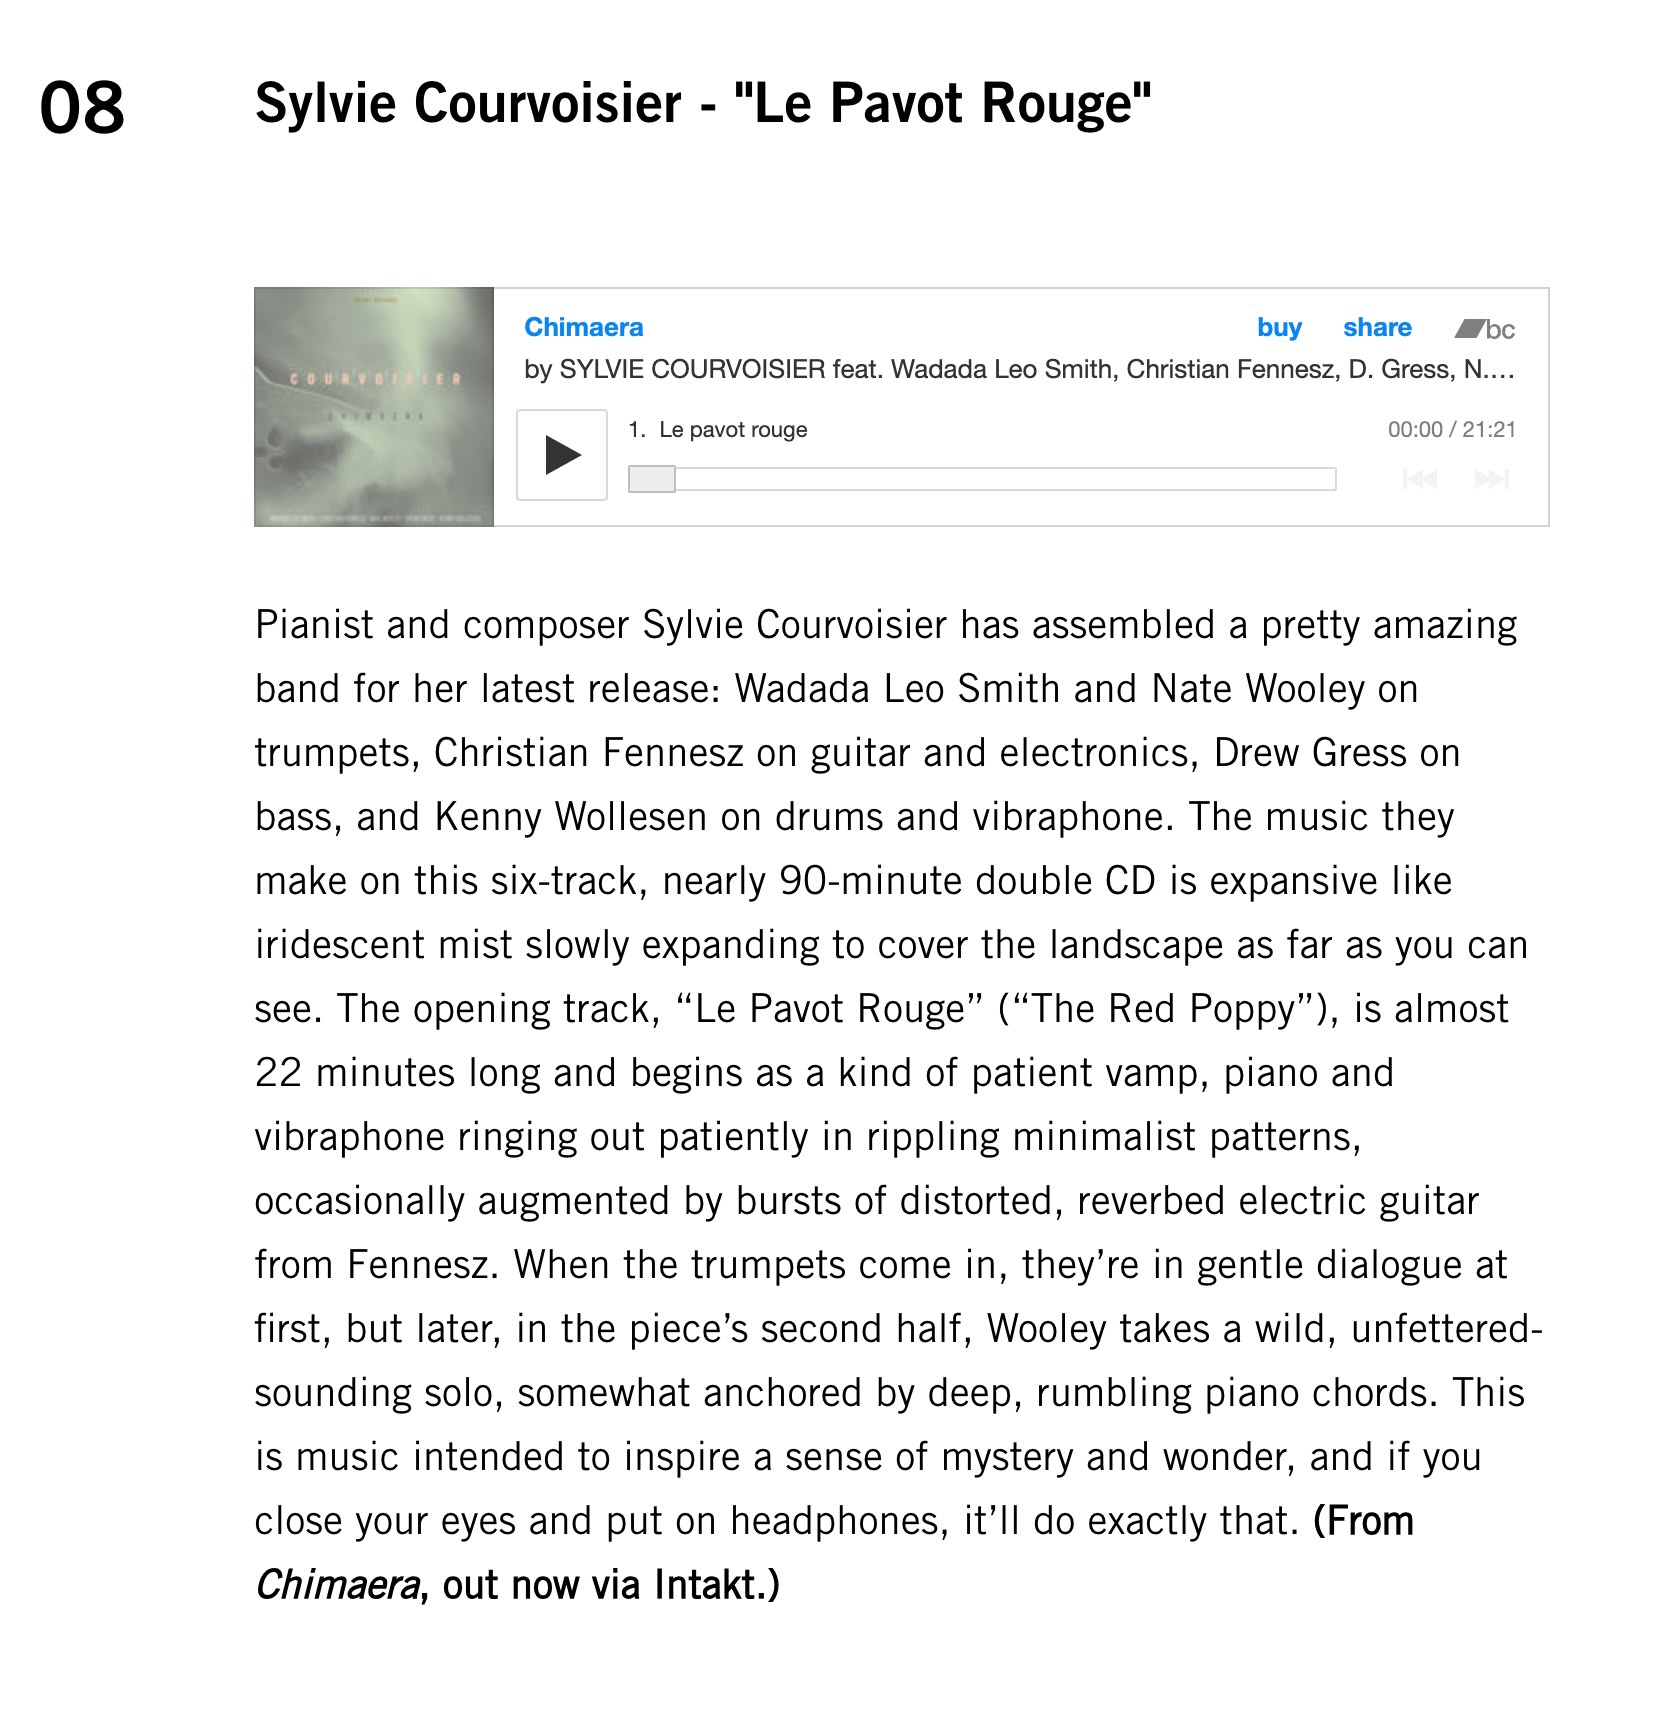 Pianist and composer Sylvie Courvoisier has assembled a pretty amazing band for her latest release: Wadada Leo Smith and Nate Wooley on trumpets, Christian Fennesz on guitar and electronics, Drew Gress on bass, and Kenny Wollesen on drums and vibraphone. The music they make on this six-track, nearly 90-minute double CD is expansive like iridescent mist slowly expanding to cover the landscape as far as you can see.